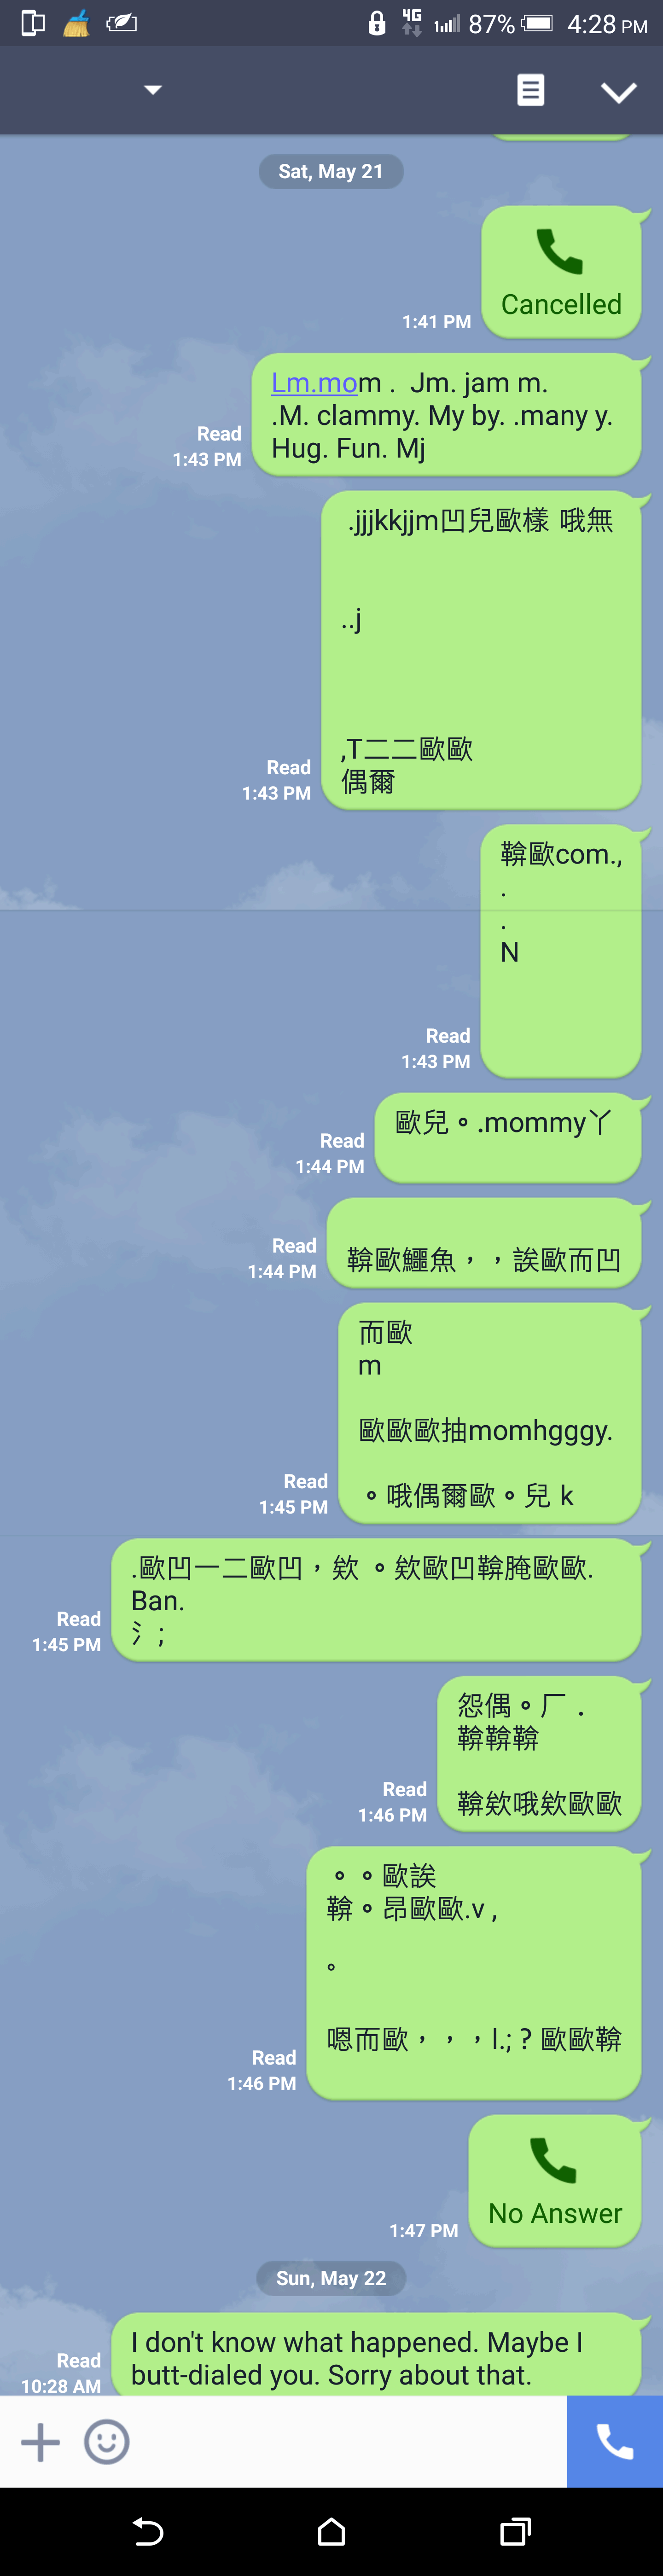 composite screenshot of a series of text messages sent in garbage English and garbage Mandarin Chinese (in Chinese characters)